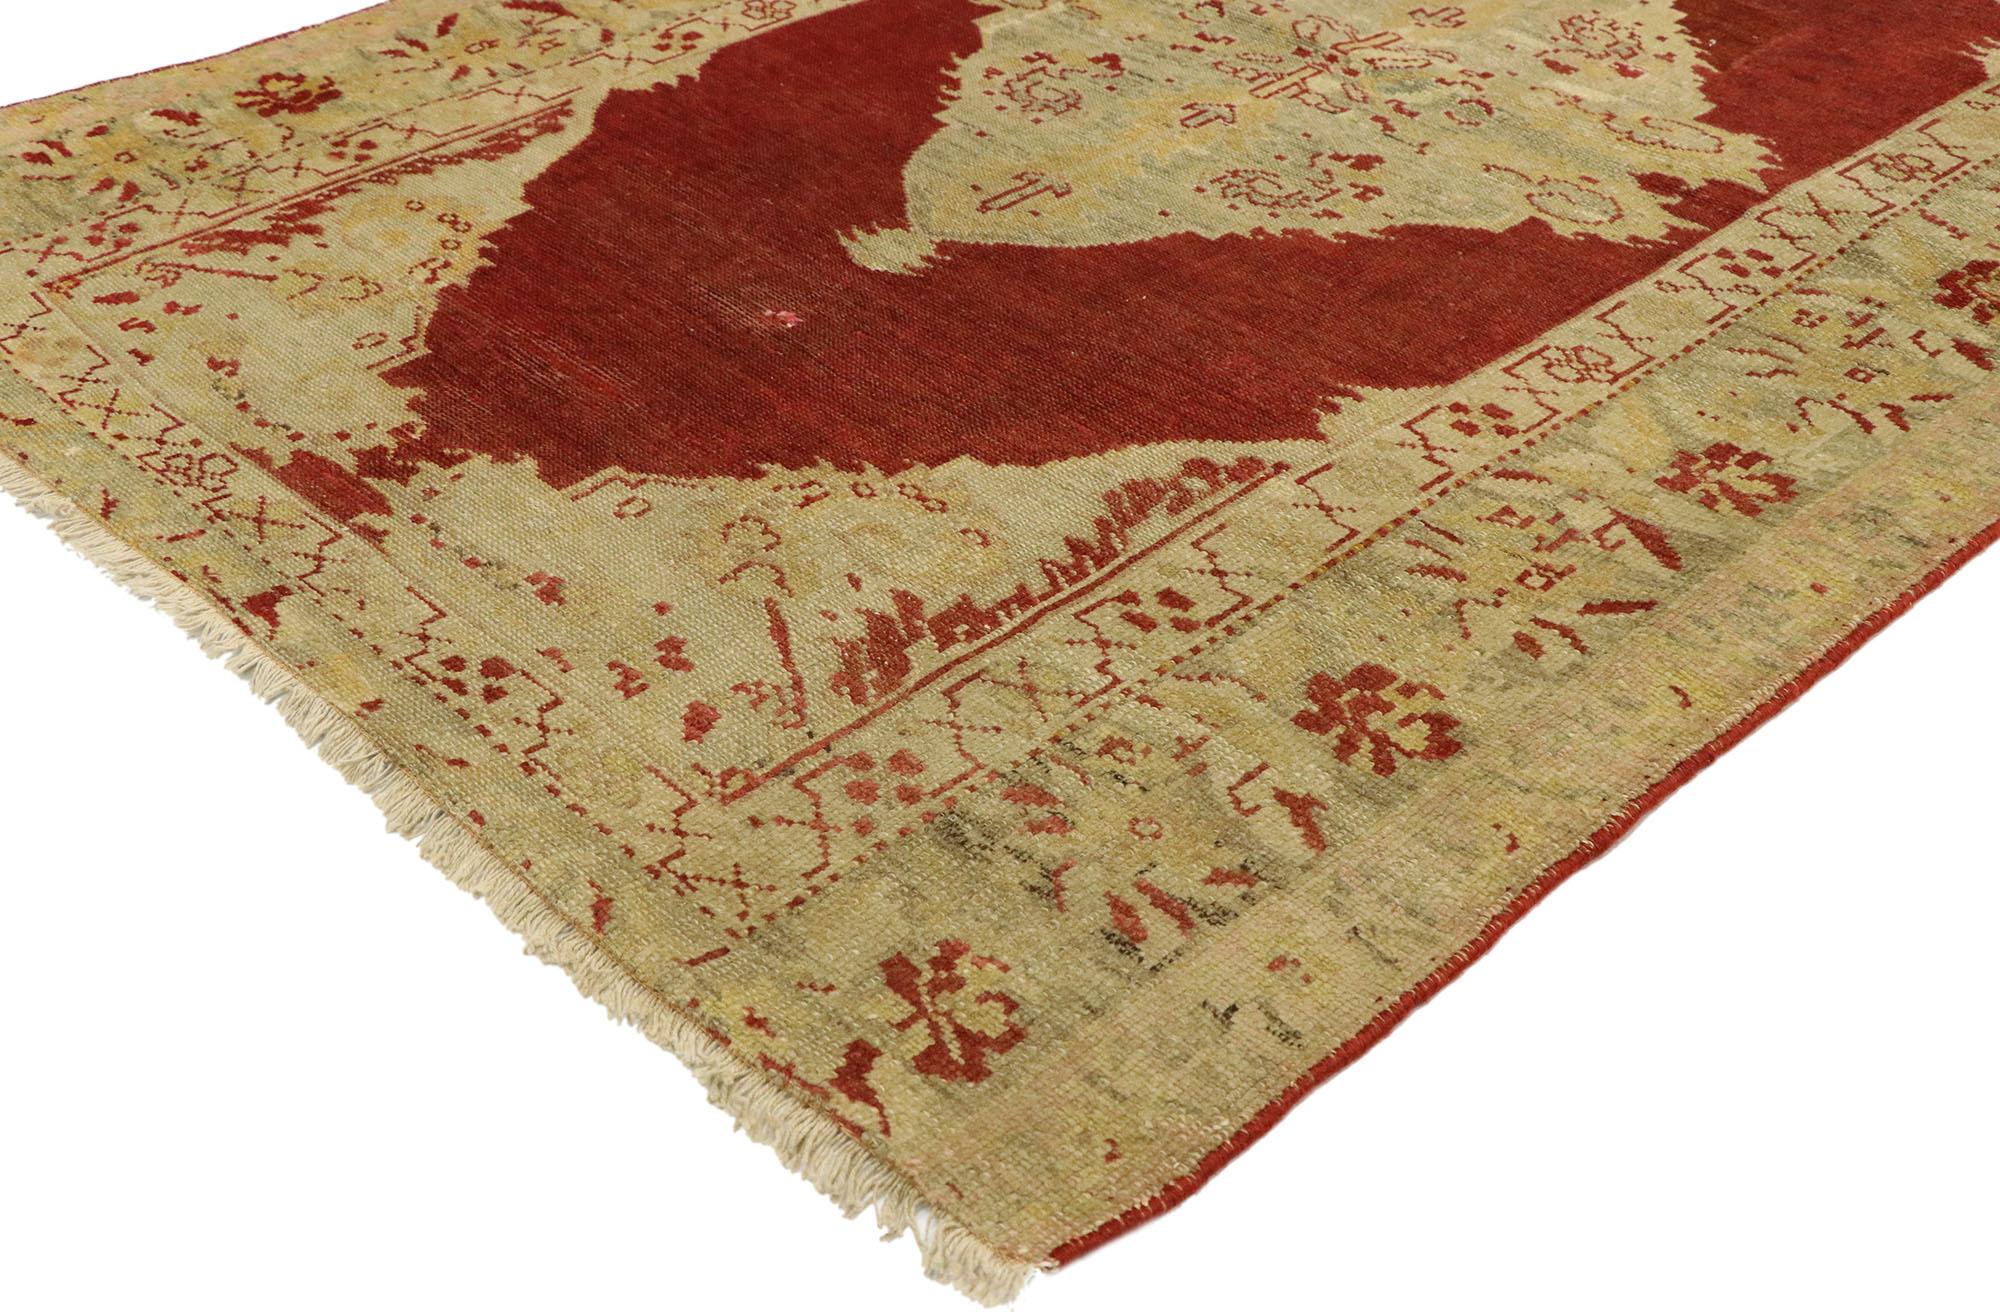 73932 Vintage Turkish Oushak Rug, 03'06 x 05'04. Step into a realm where Anatolian history and refined artistry intertwine, weaving elegance and charm into this hand knotted wool vintage Turkish Oushak rug. Picture a lavish expanse of open red, a